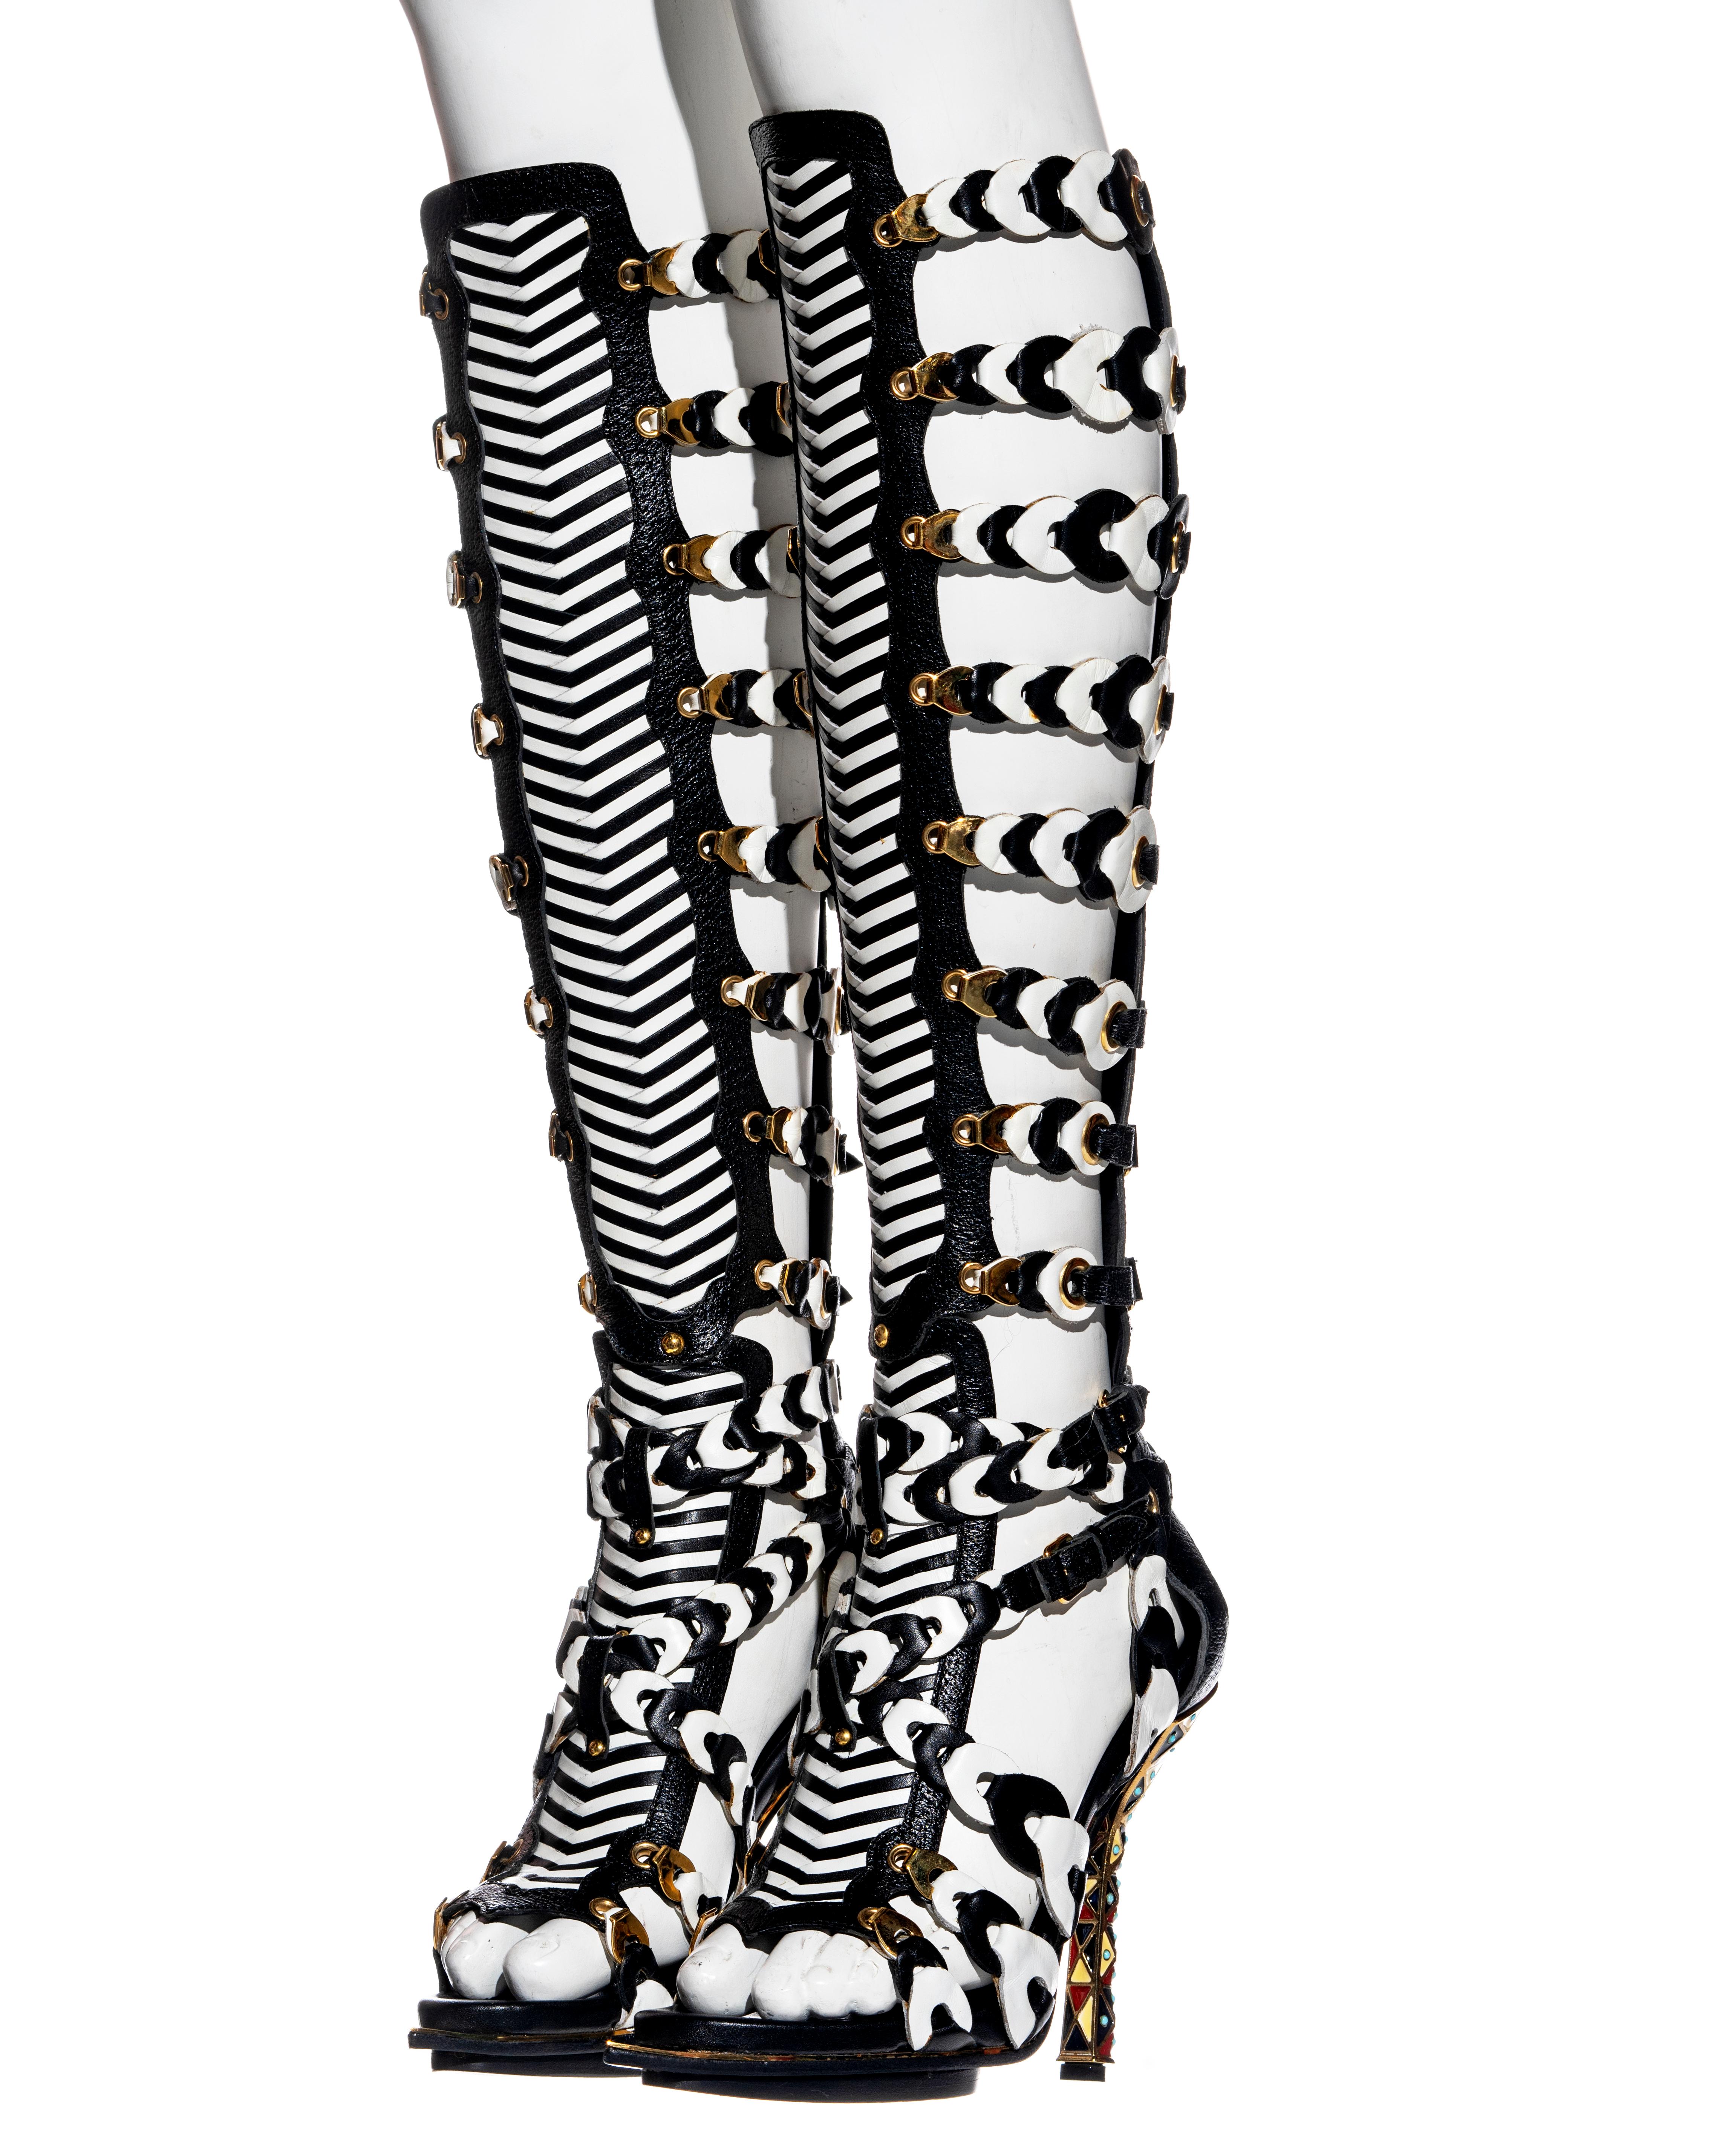 ▪ Important Balenciaga black and white woven leather gladiator sandals
▪ Designed by Nicolas Ghesquière
▪ Gold metal hardware 
▪ Multiple buckled strap fastenings 
▪ Pointed open toe with gold mirrored detail 
▪ Cloisonné bejeweled heels
▪ Size